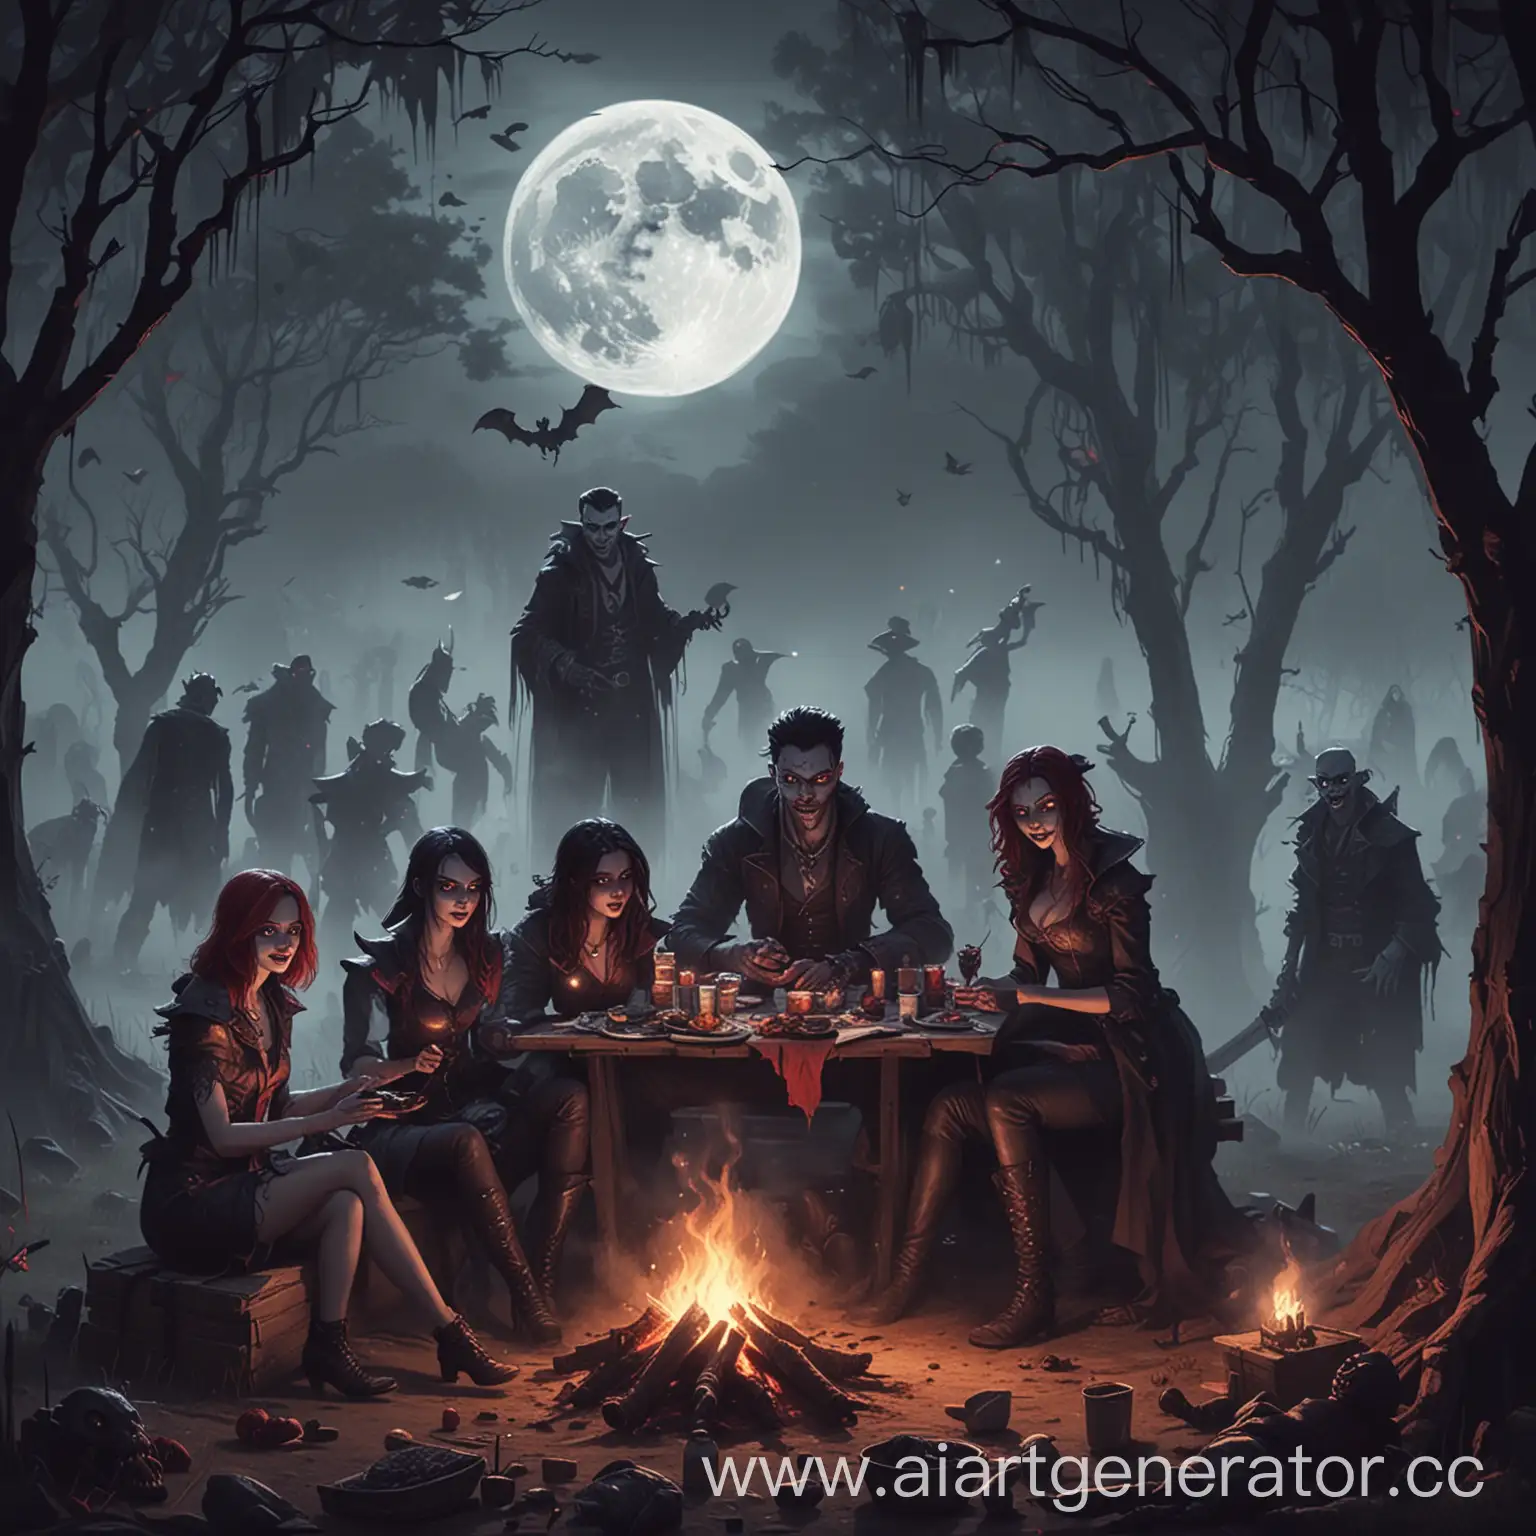 Happy vampires at a picnic, bonfire, fog, moon, around frightened little monsters. In the style of the game Vampire: The Masquerade.